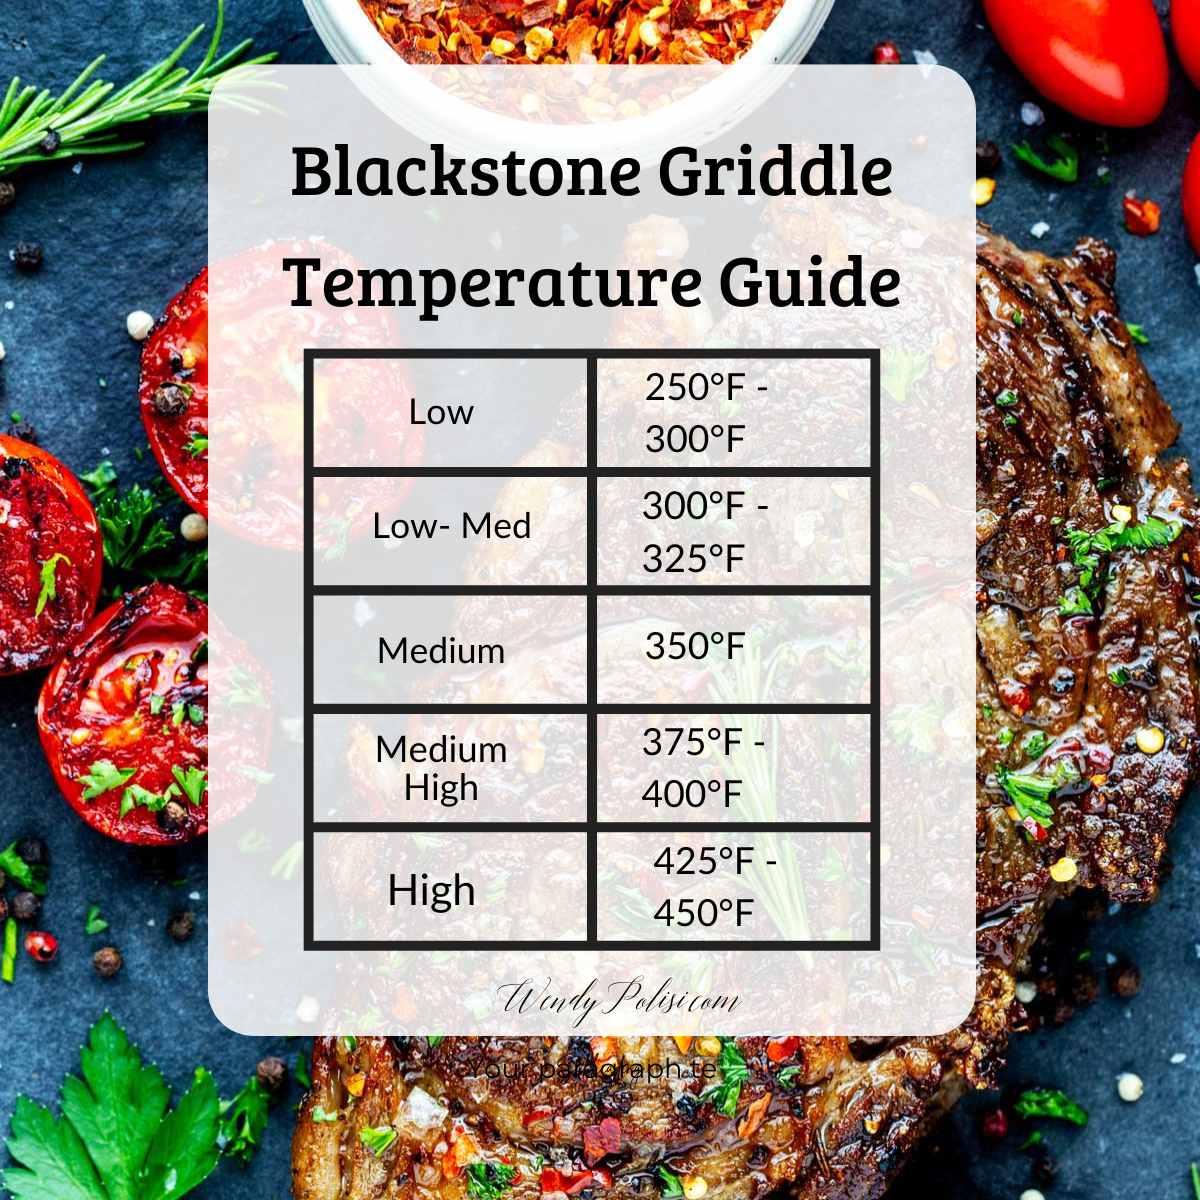 Graphic describing the recommended temperatures on a blackstone griddle for low, medium low, medium, medium high, and high temperatures.